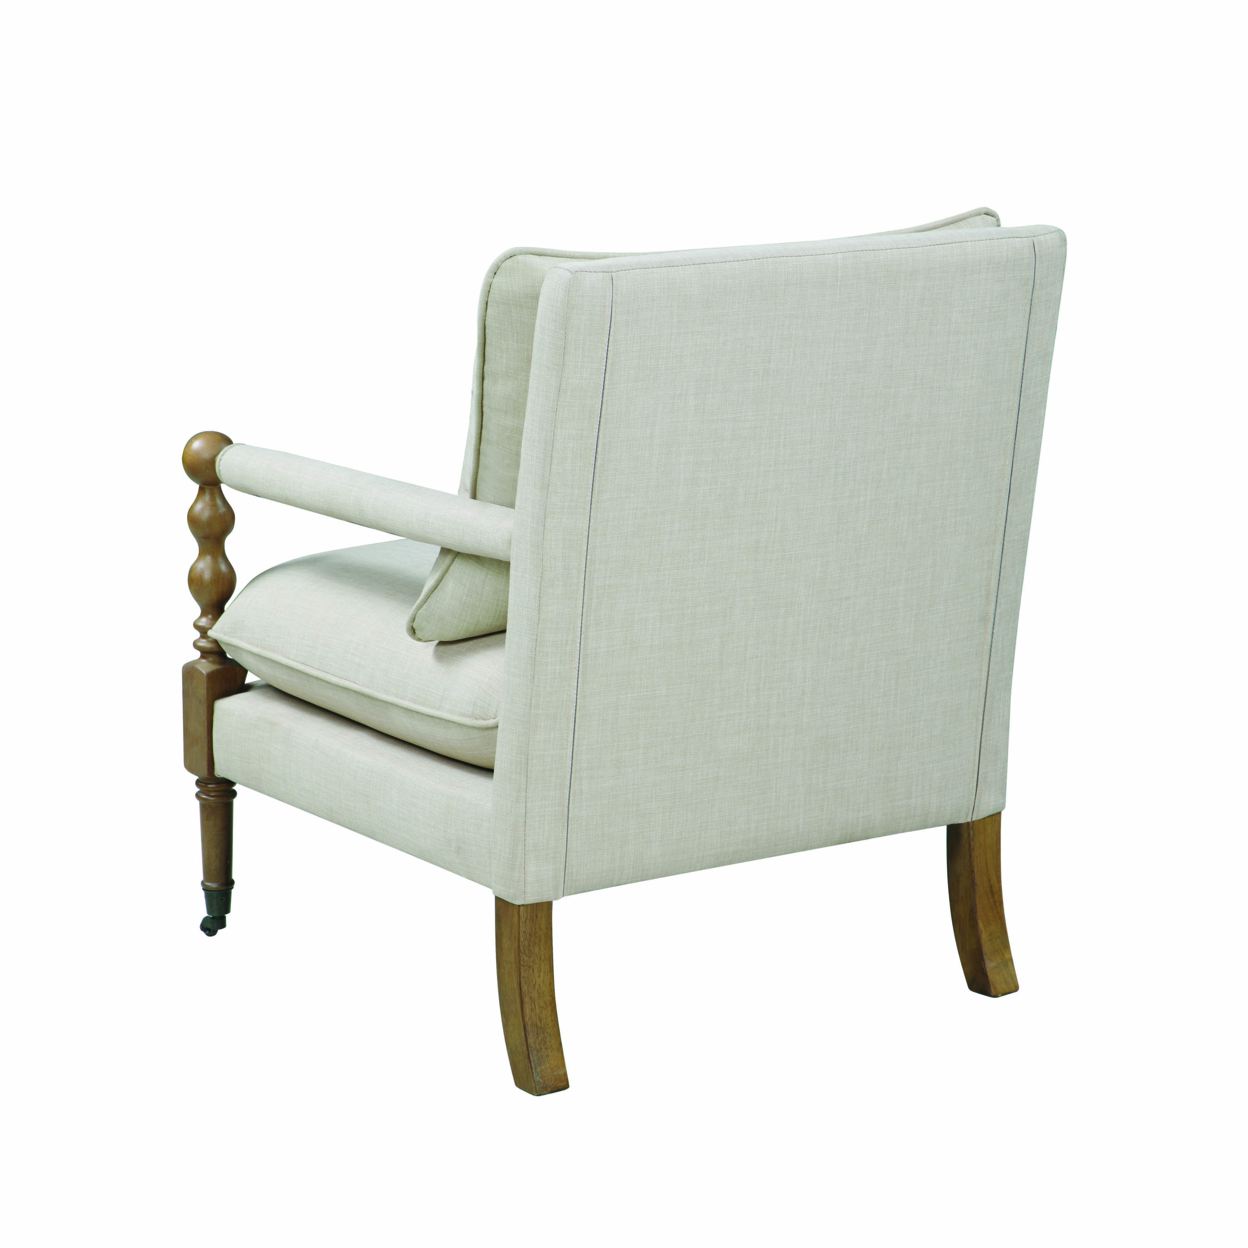 Fabric Upholstered Wooden Accent Chair With Manchette Armrest, Beige And Brown- Saltoro Sherpi